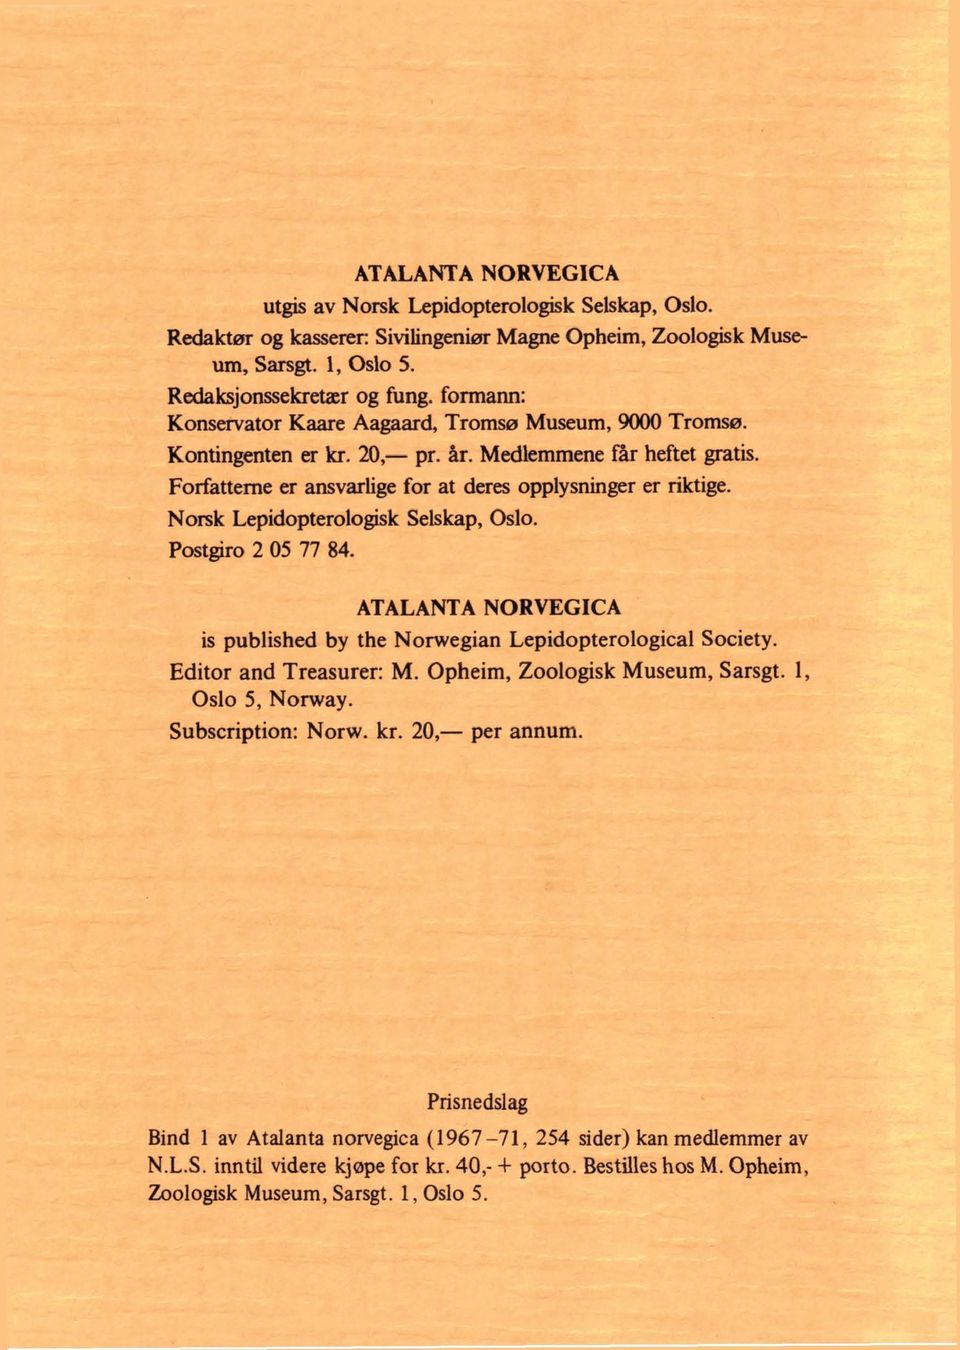 Postgiro 2 05 77 84. ATALANTA NORVEGICA is published by the Norwegian Lepidopterological Society. Editor and Treasurer: M. Opheim, Zoologisk Museum, Sarsgt. 1, Oslo 5, Norway.